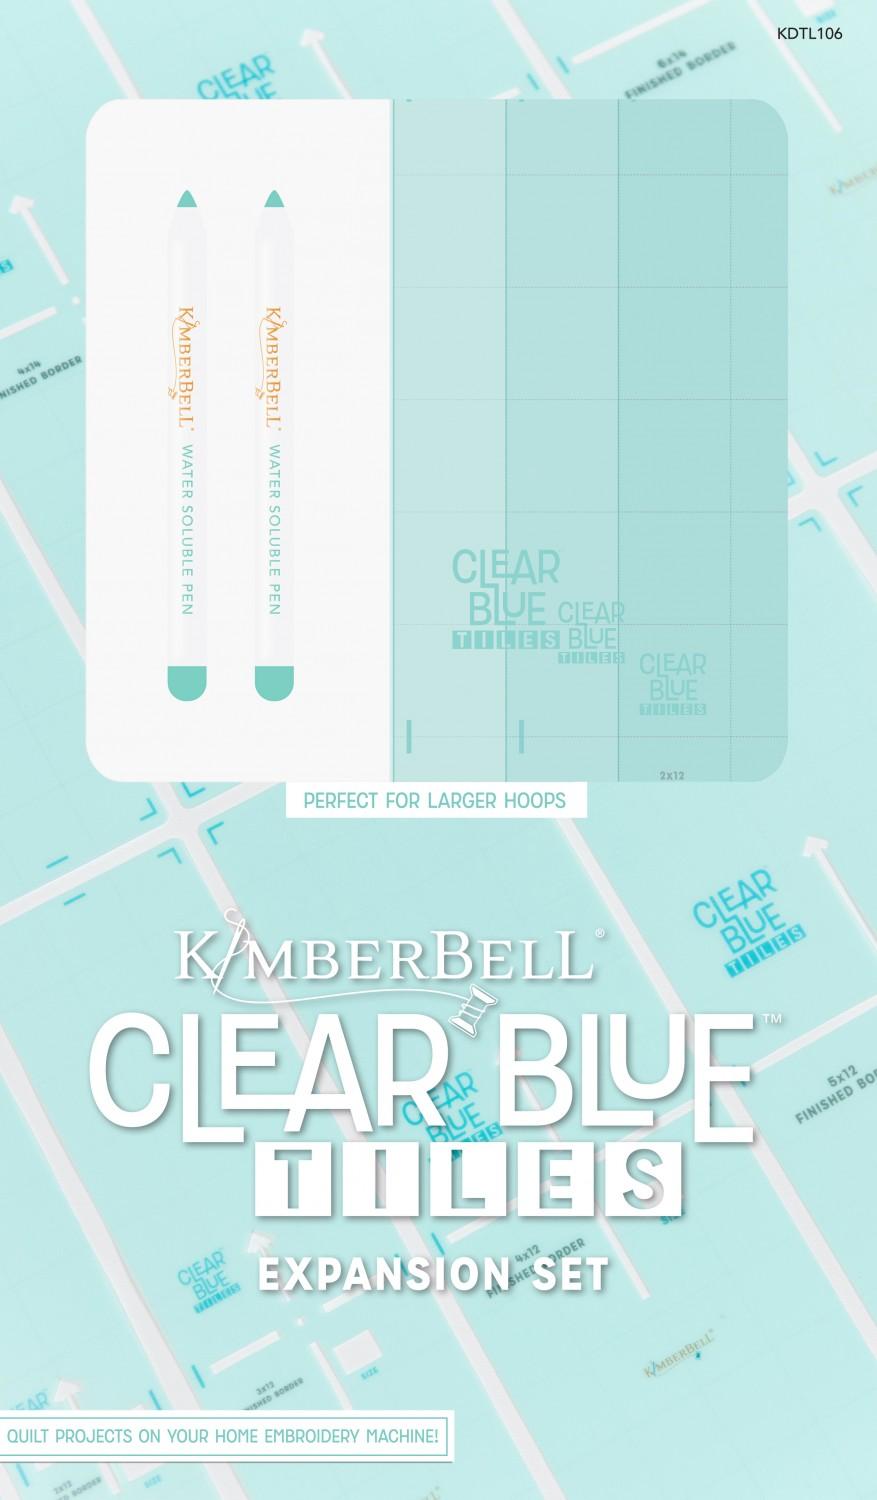 Clear Blue Tiles Expansion SetKimberbell